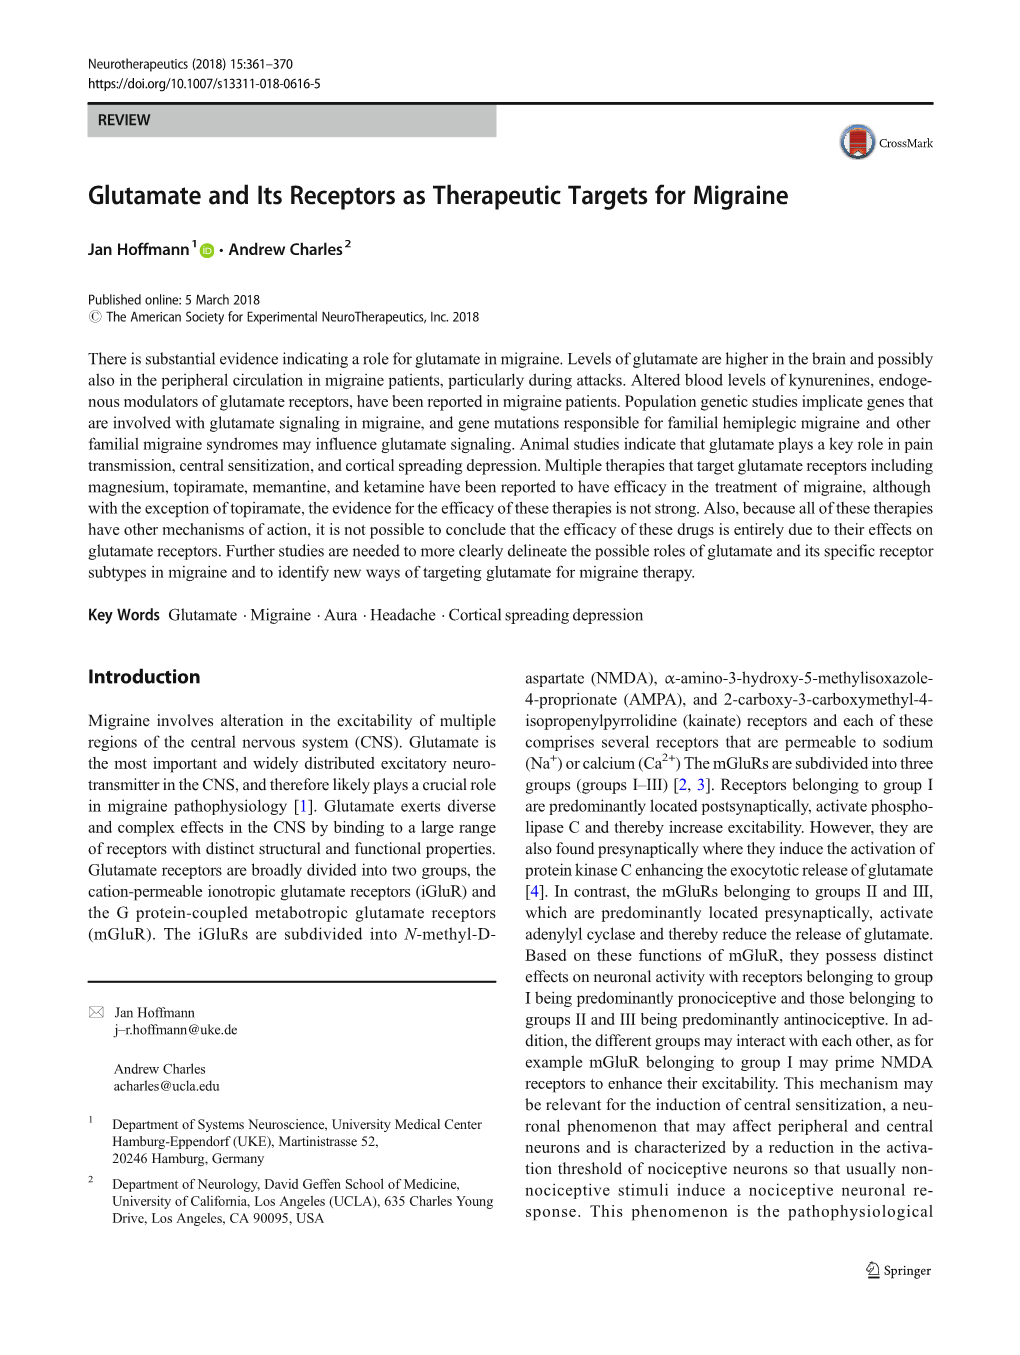 Glutamate and Its Receptors As Therapeutic Targets for Migraine